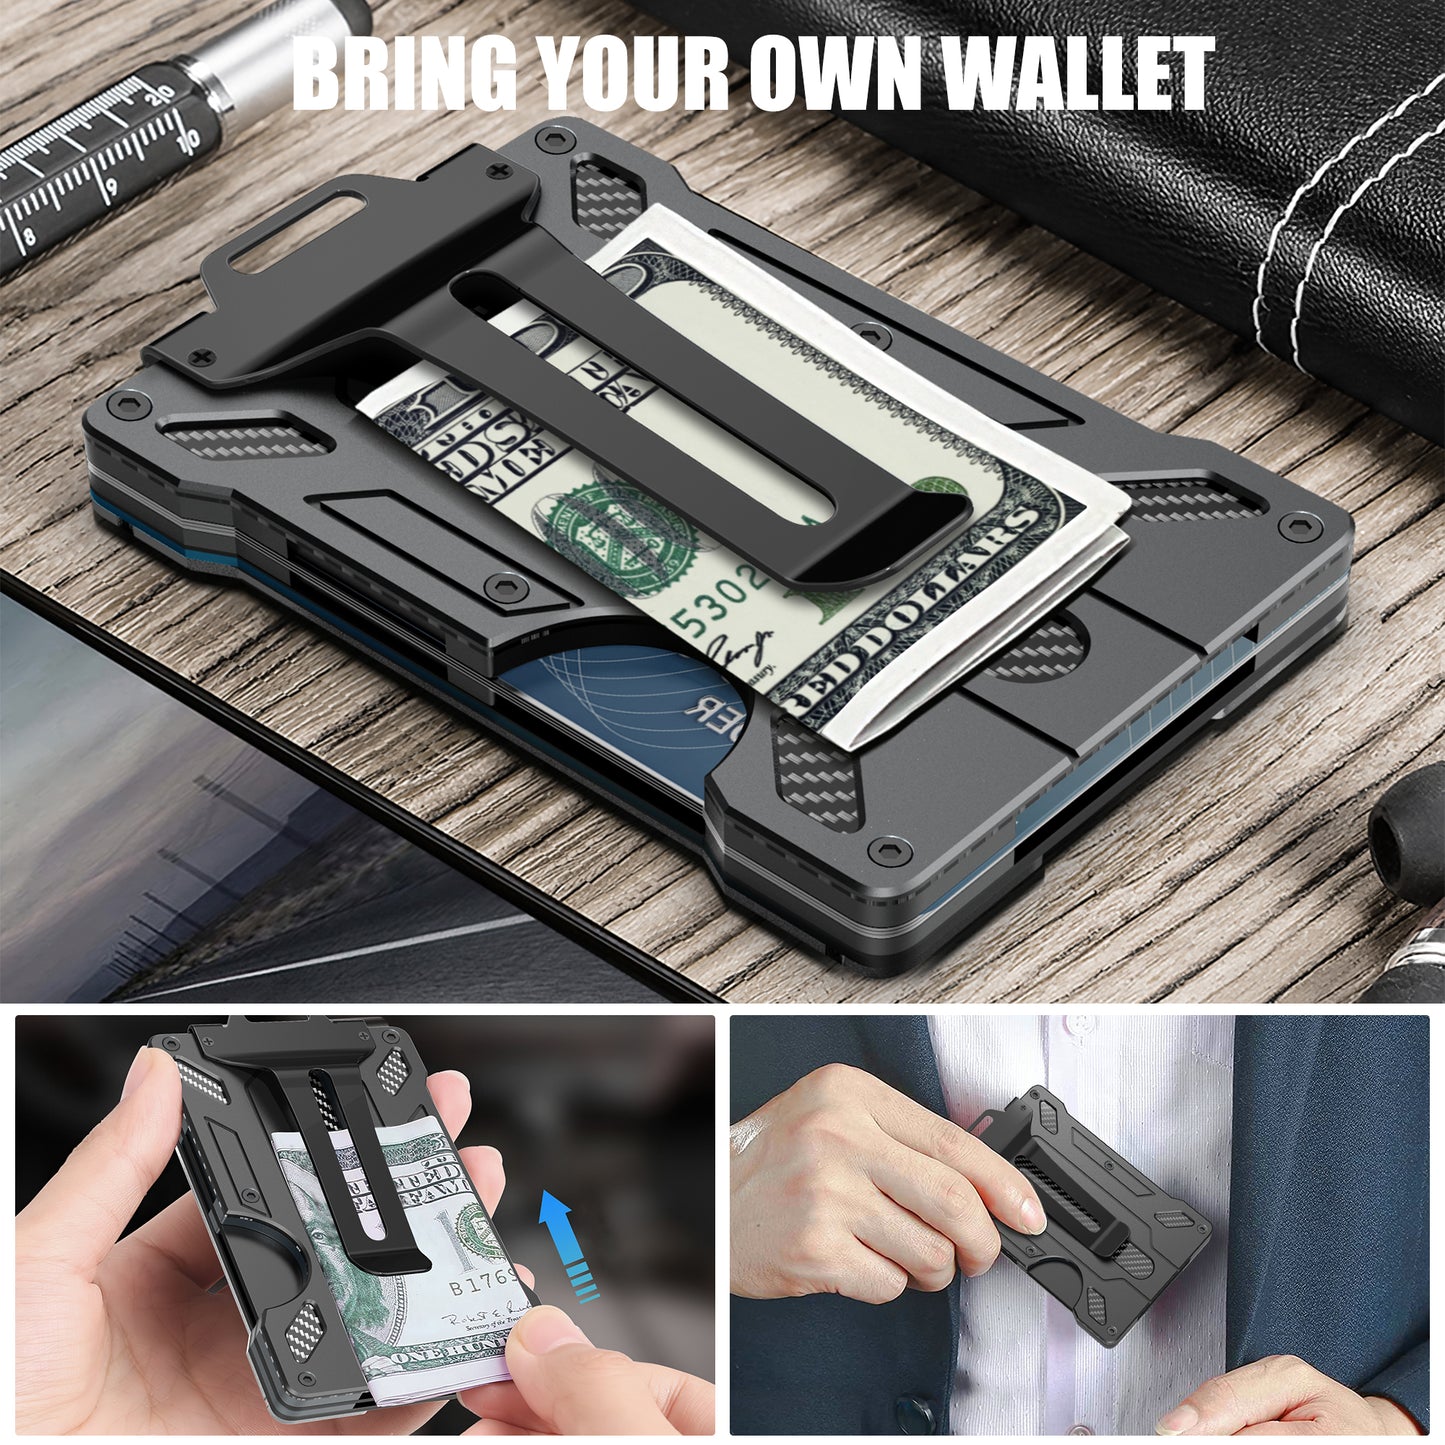 Wallet For Men - Slim Aluminum Metal Money Clip with 1 Clear window ID Badge Holder, RFID Blocking, Holds up 15 Cards with Cash Clip. Ultra-Thin Minimalist Wallet,dark Black